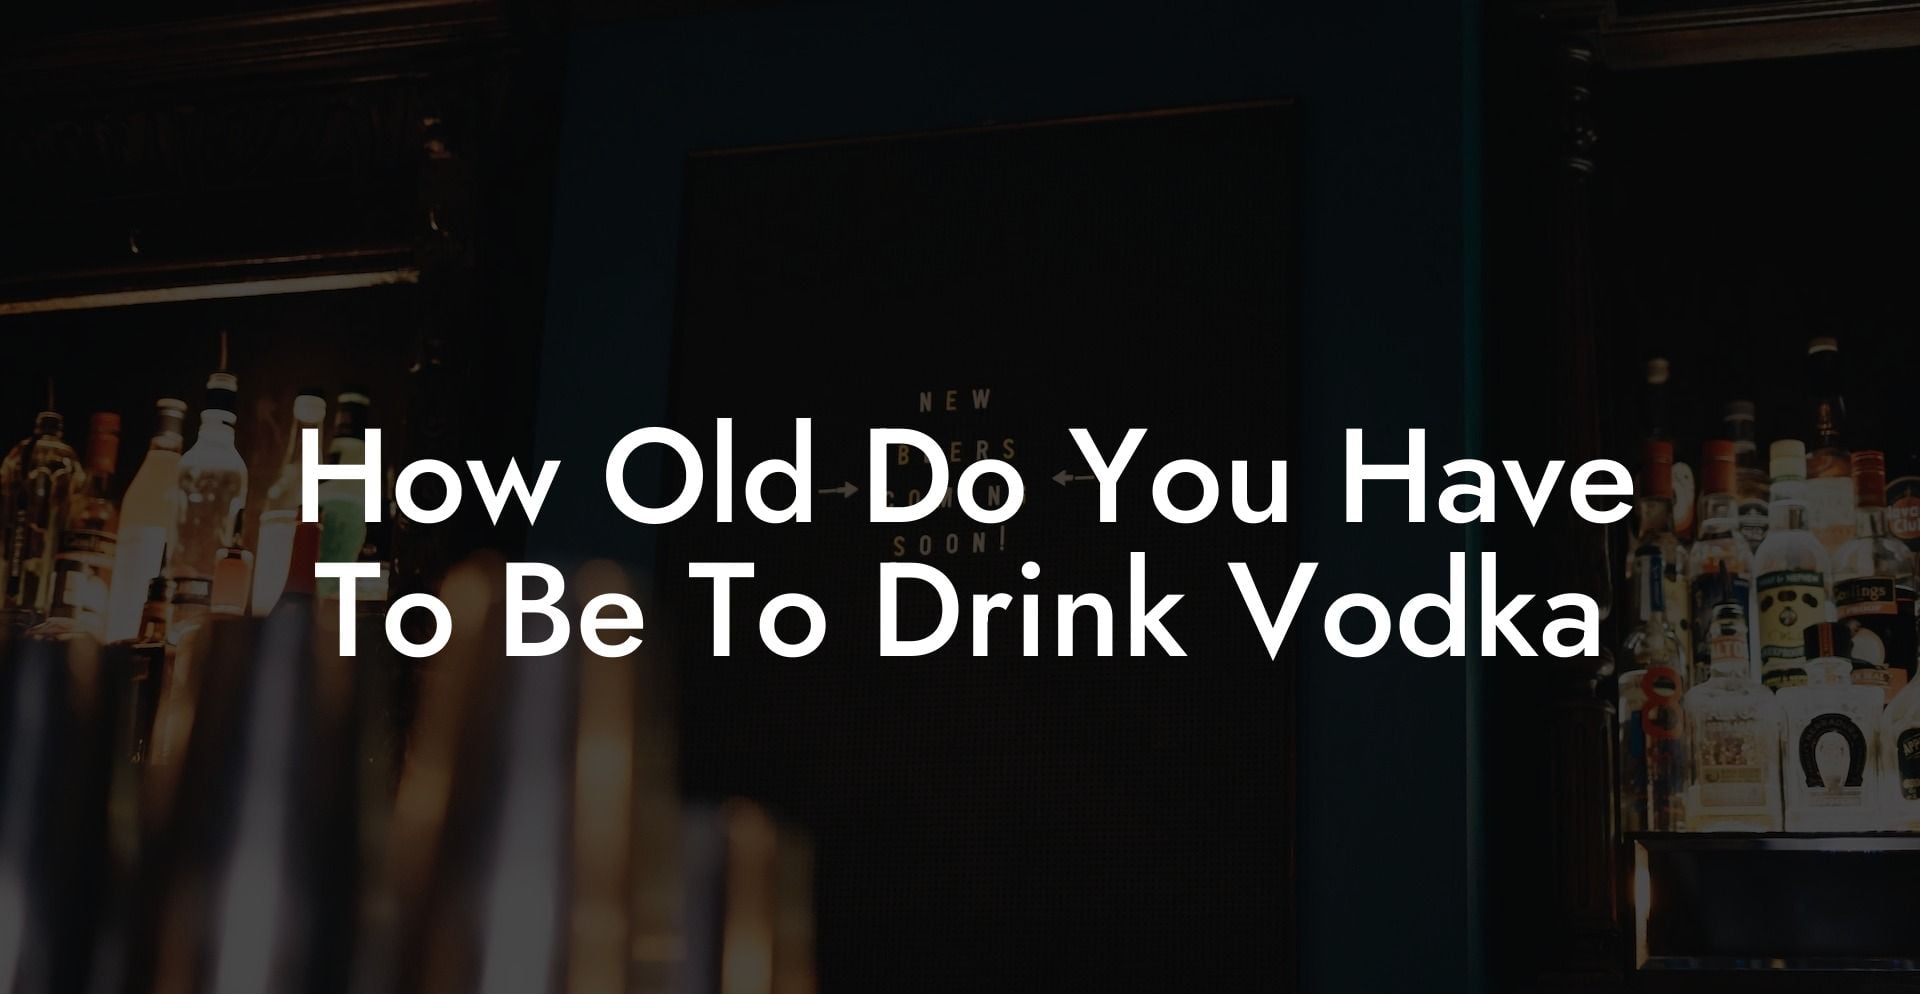 How Old Do You Have To Be To Drink Vodka